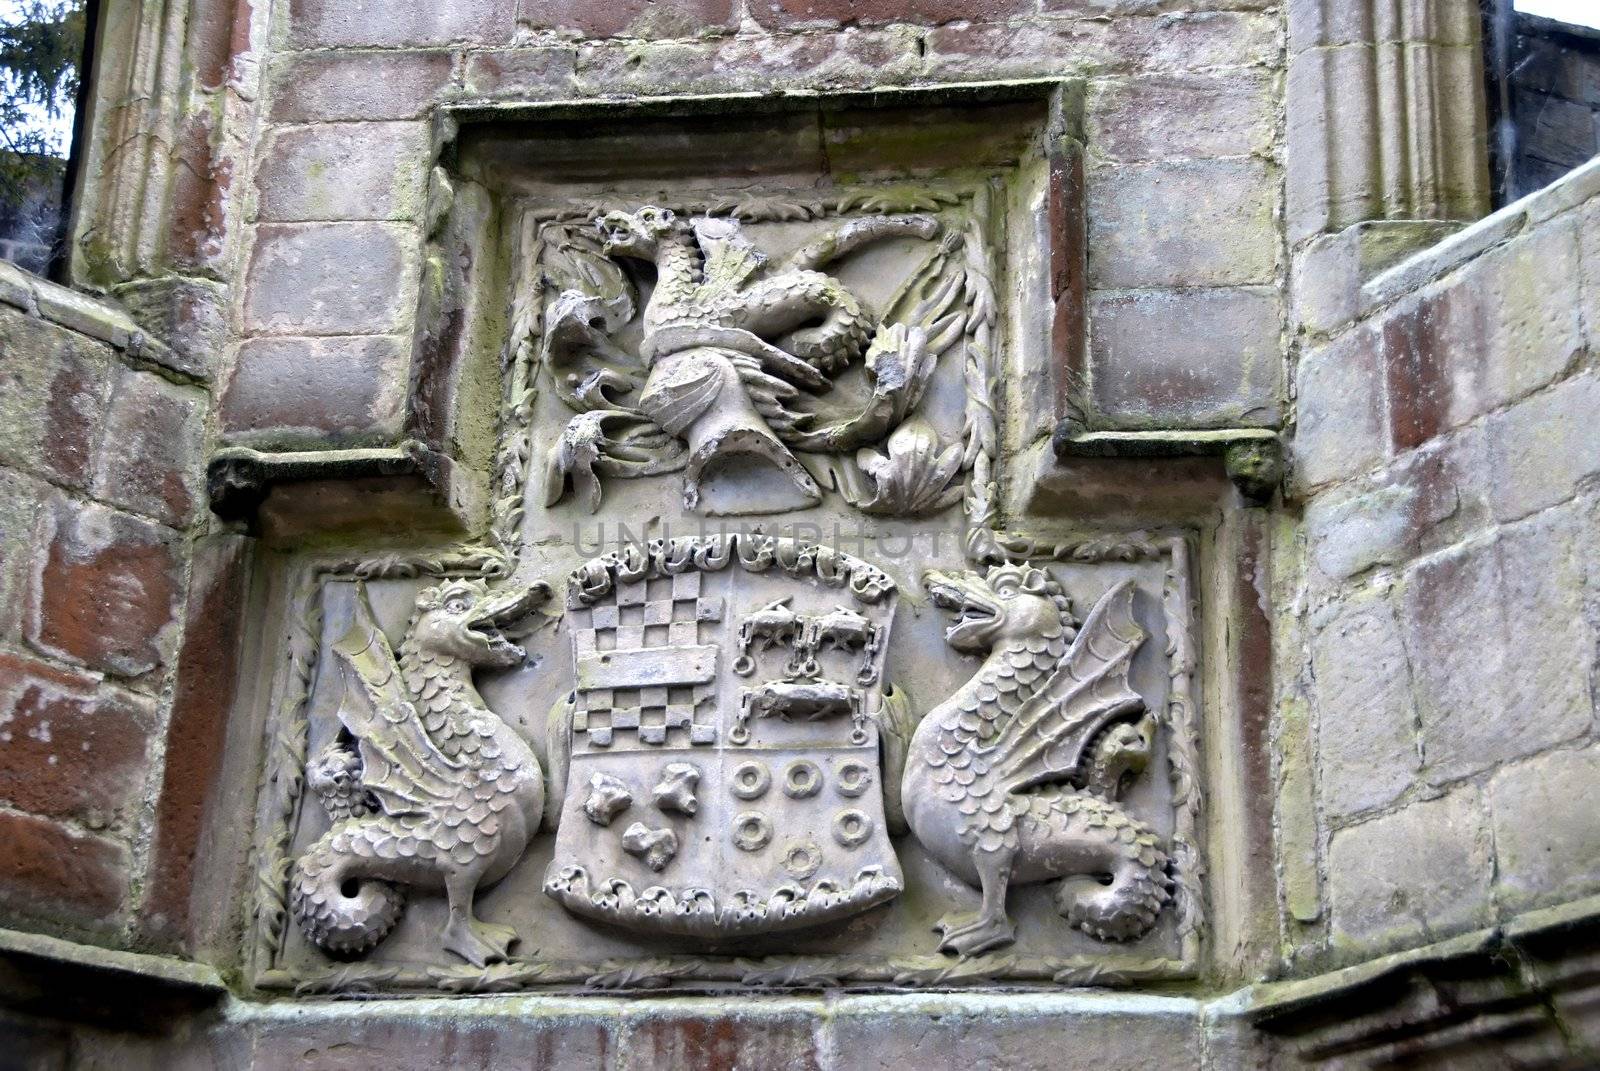 A family coat of arms carved from stone in the courtyard of a medieval castle in Yorkshire